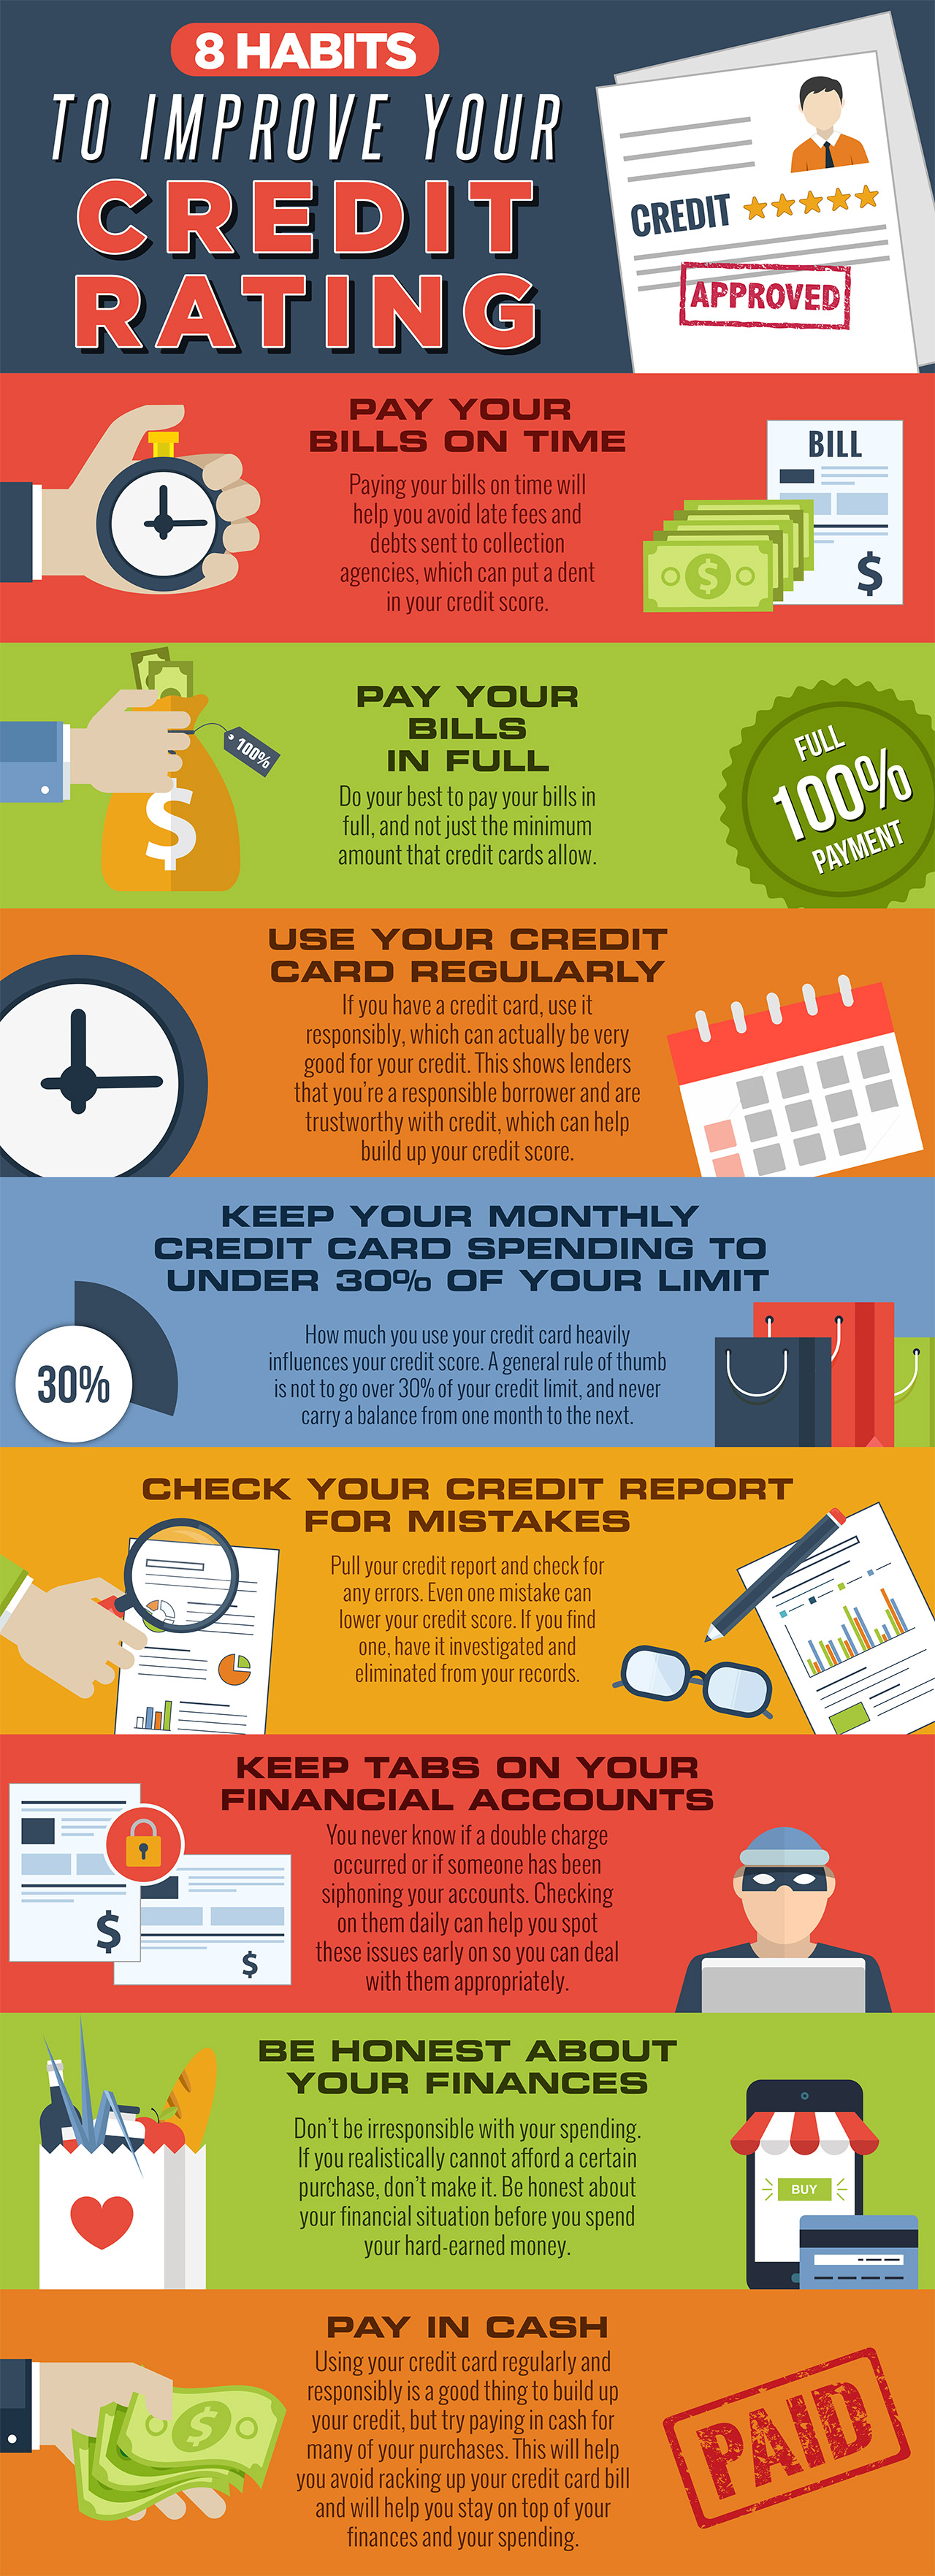 infographic-8-habits-to-improve-your-credit-rating-content